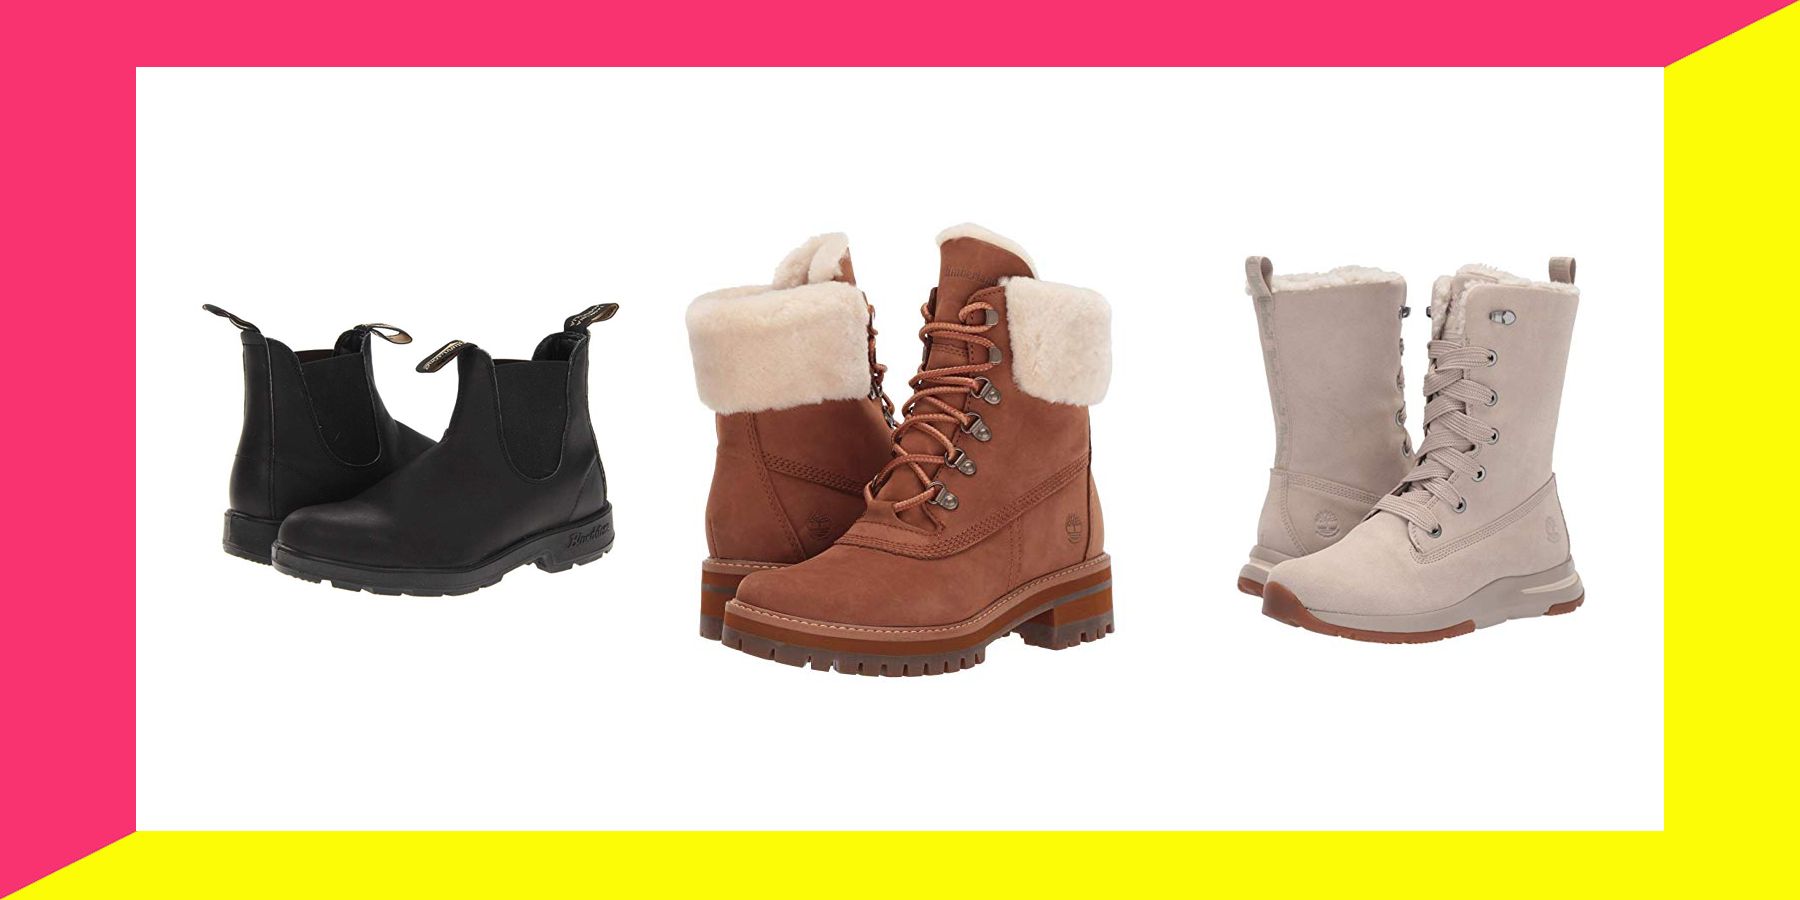 cyber monday deals on boots